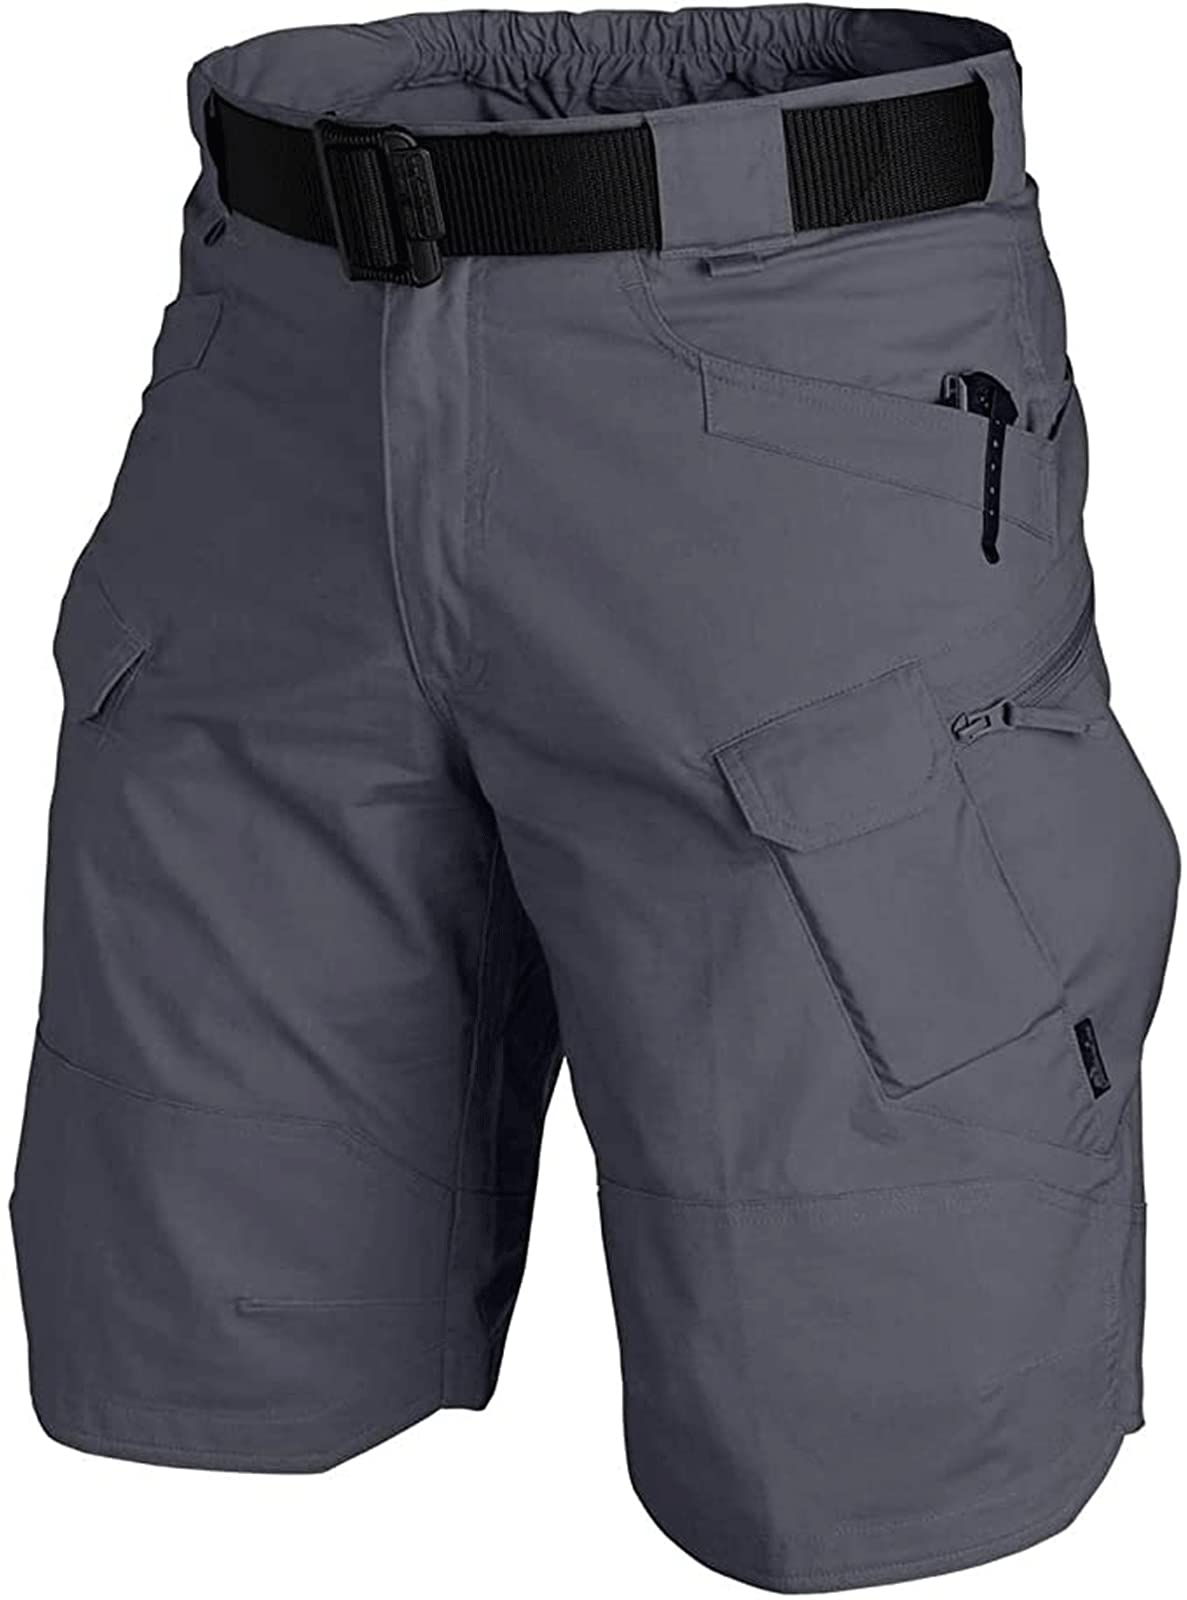 AUTIWITUA Mens Waterproof Tactical Shorts Outdoor cargo Shorts, Lightweight Quick Dry Breathable Hiking Fishing cargo Shorts(NO 